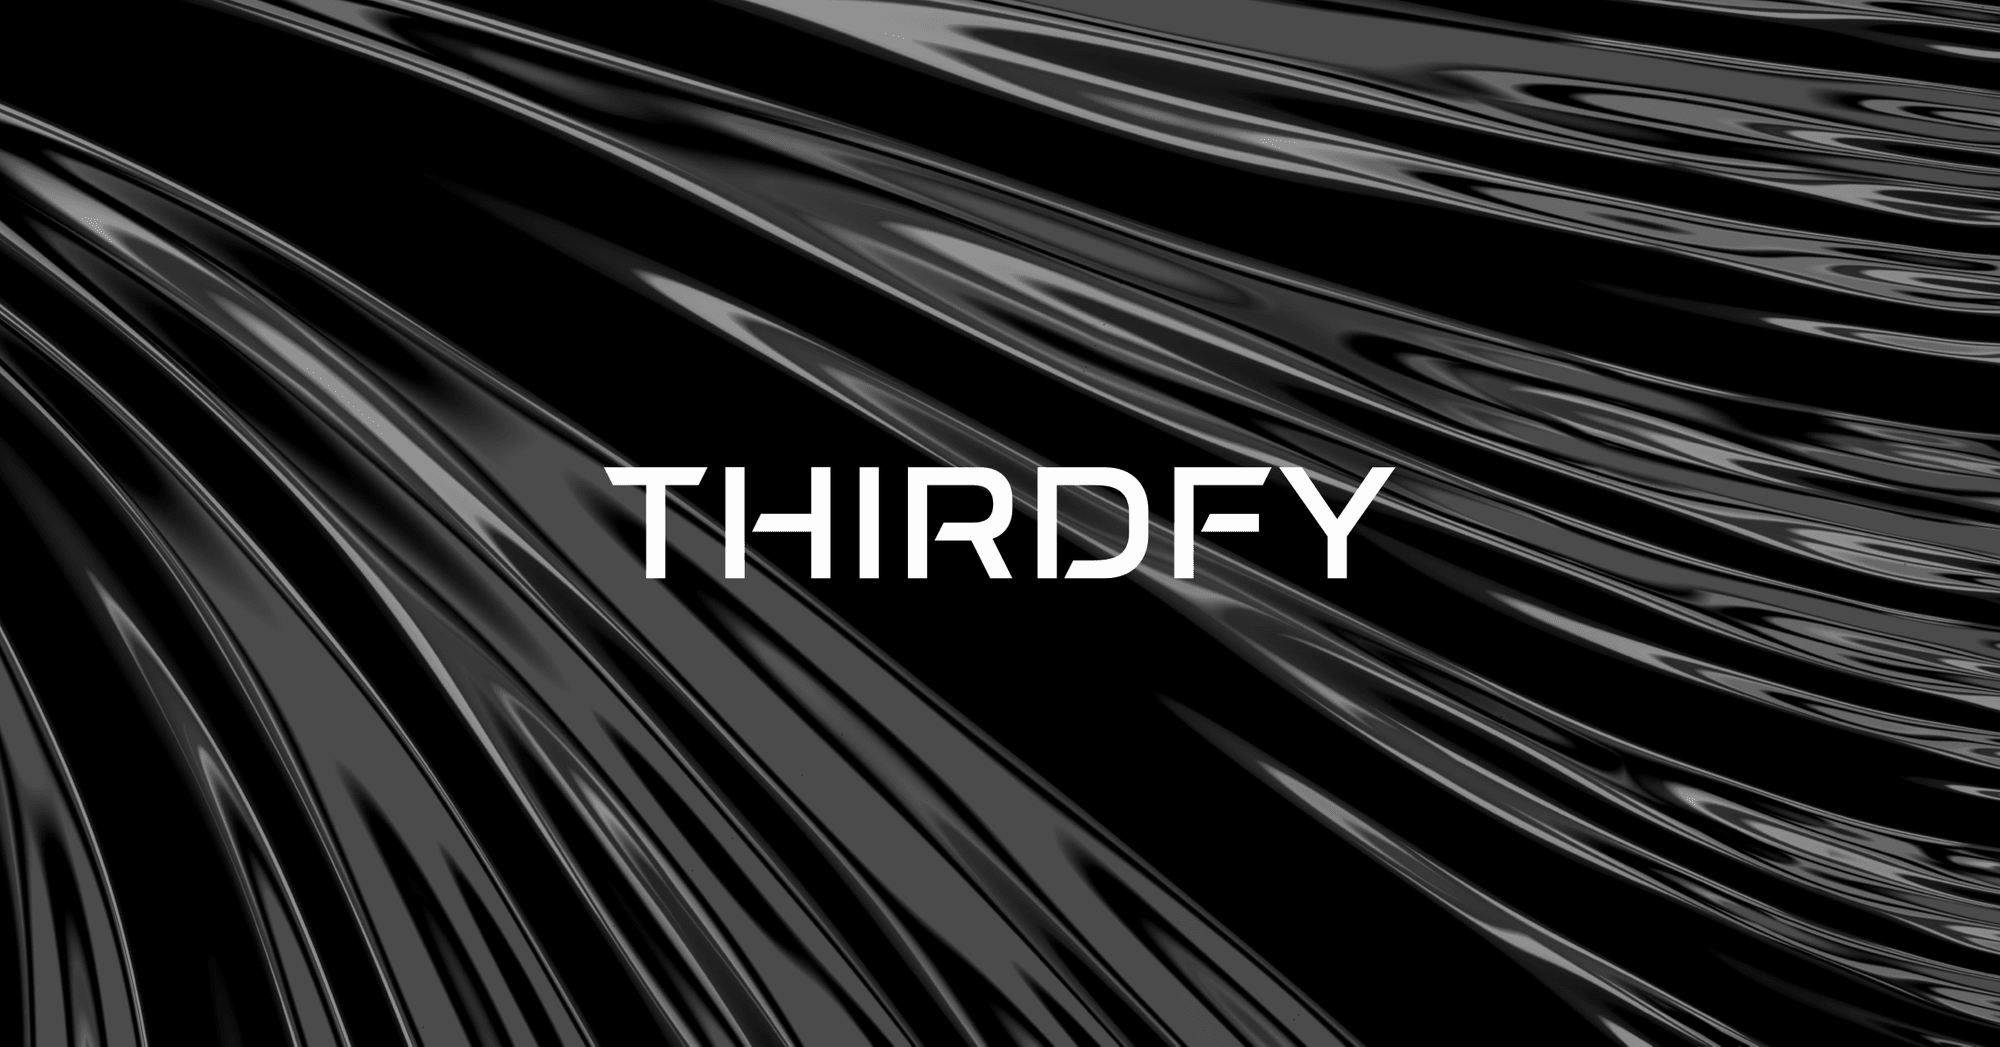 Thirdfy is coming